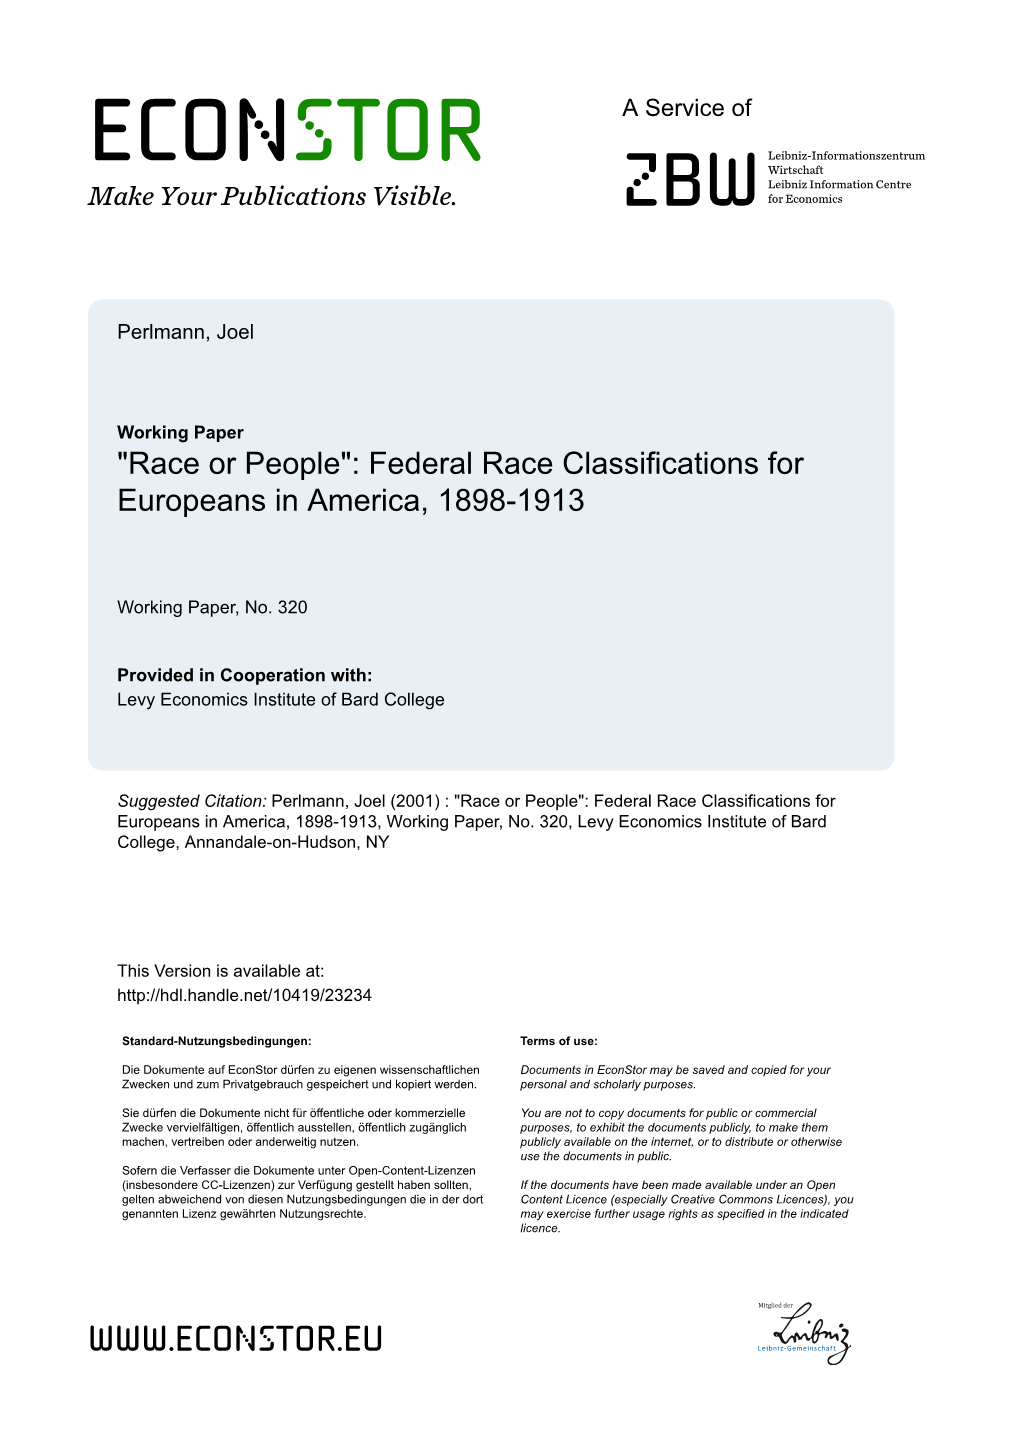 Federal Race Classifications for Europeans in America, 1898-1913